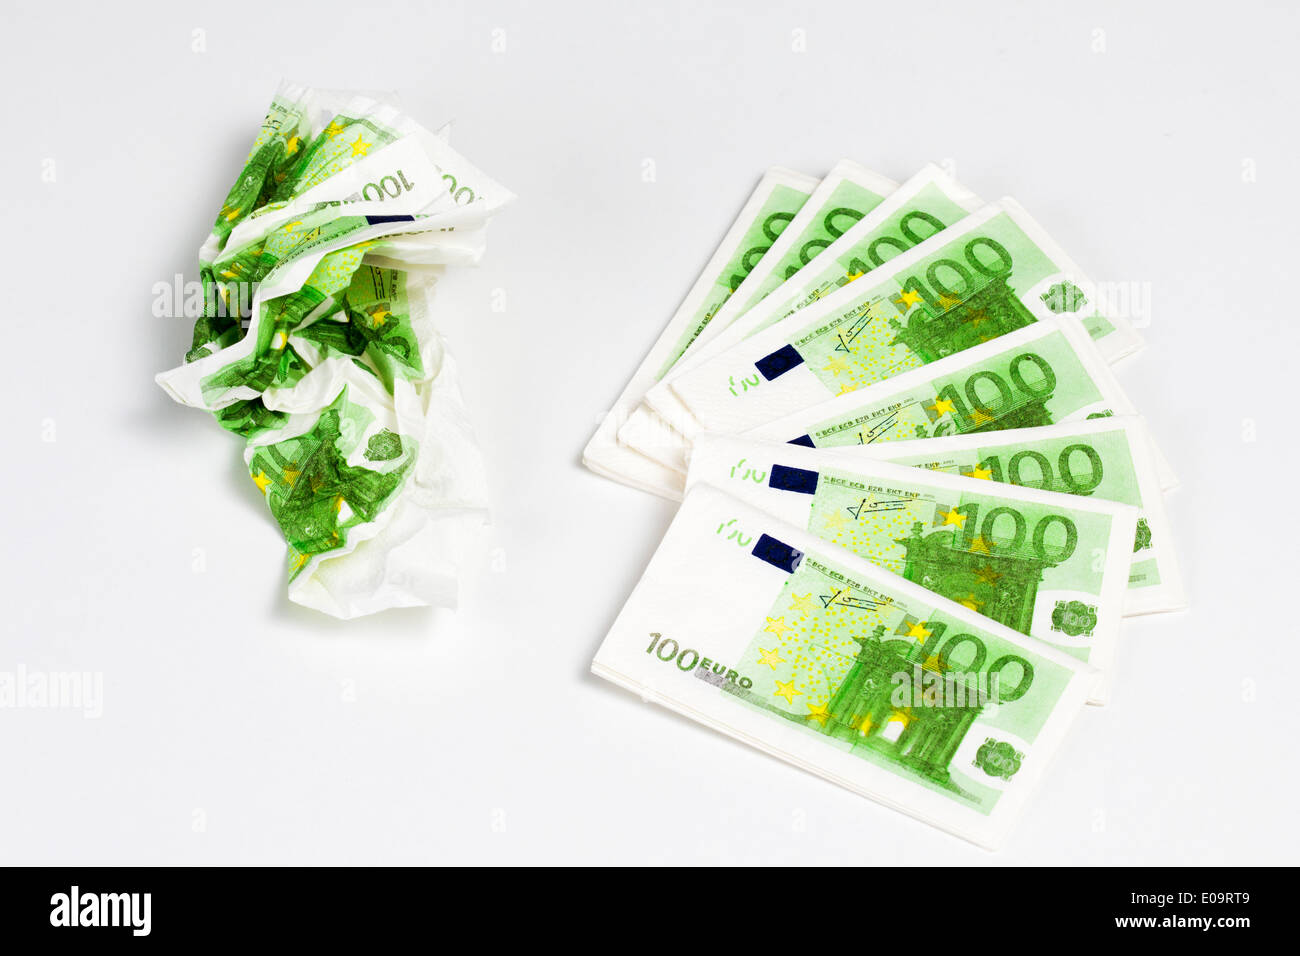 Crumpled and straight tissue handkerchieves looking like one hundred euro notes Stock Photo